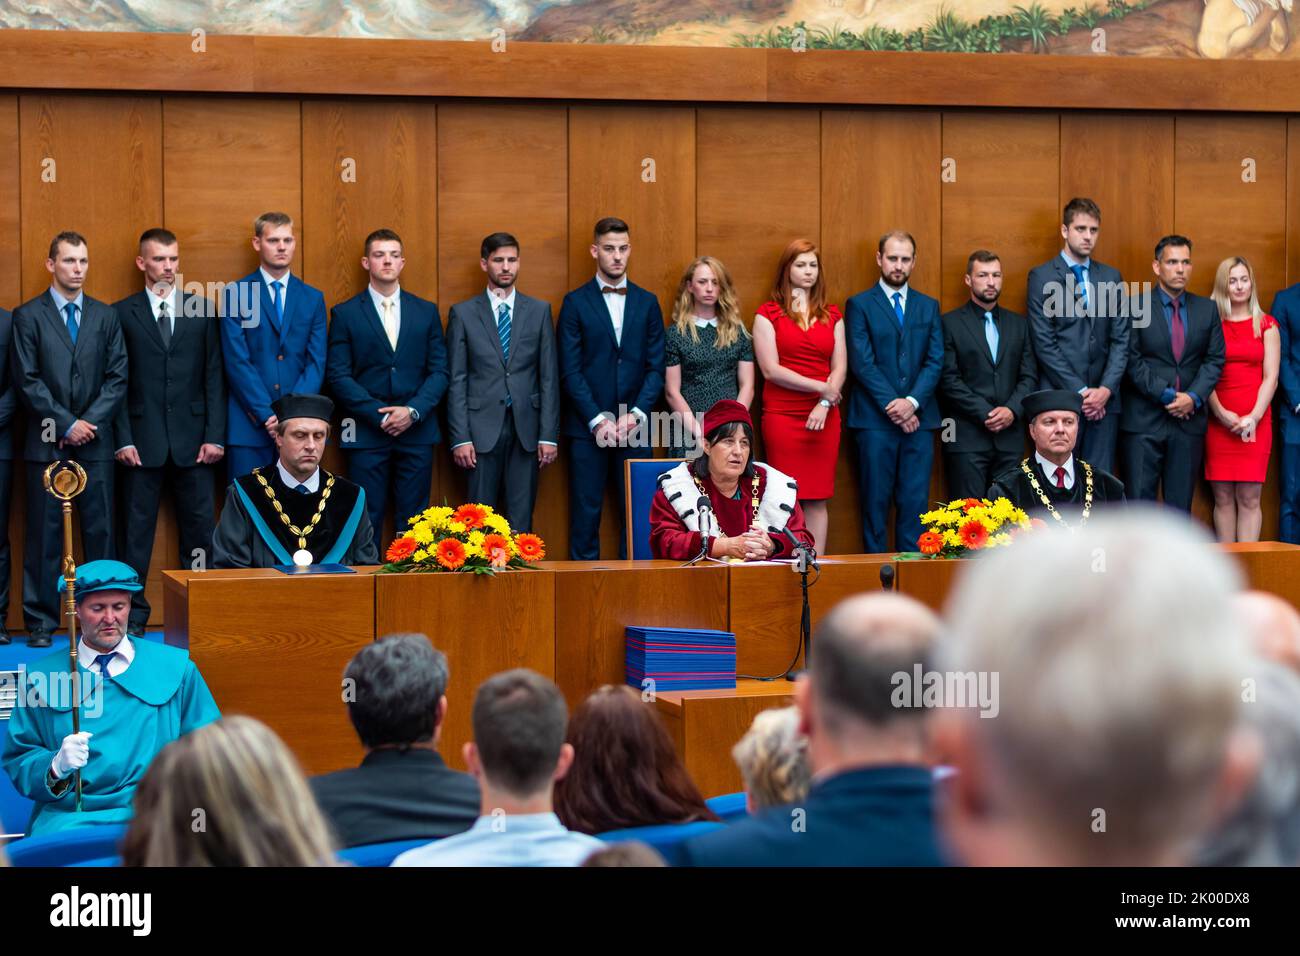 BRNO, CZECH REPUBLIC - 12.7.2019: Graduation ceremony at Masaryk University in Brno. The diploma certificate is prepared on the table. Students are wa Stock Photo